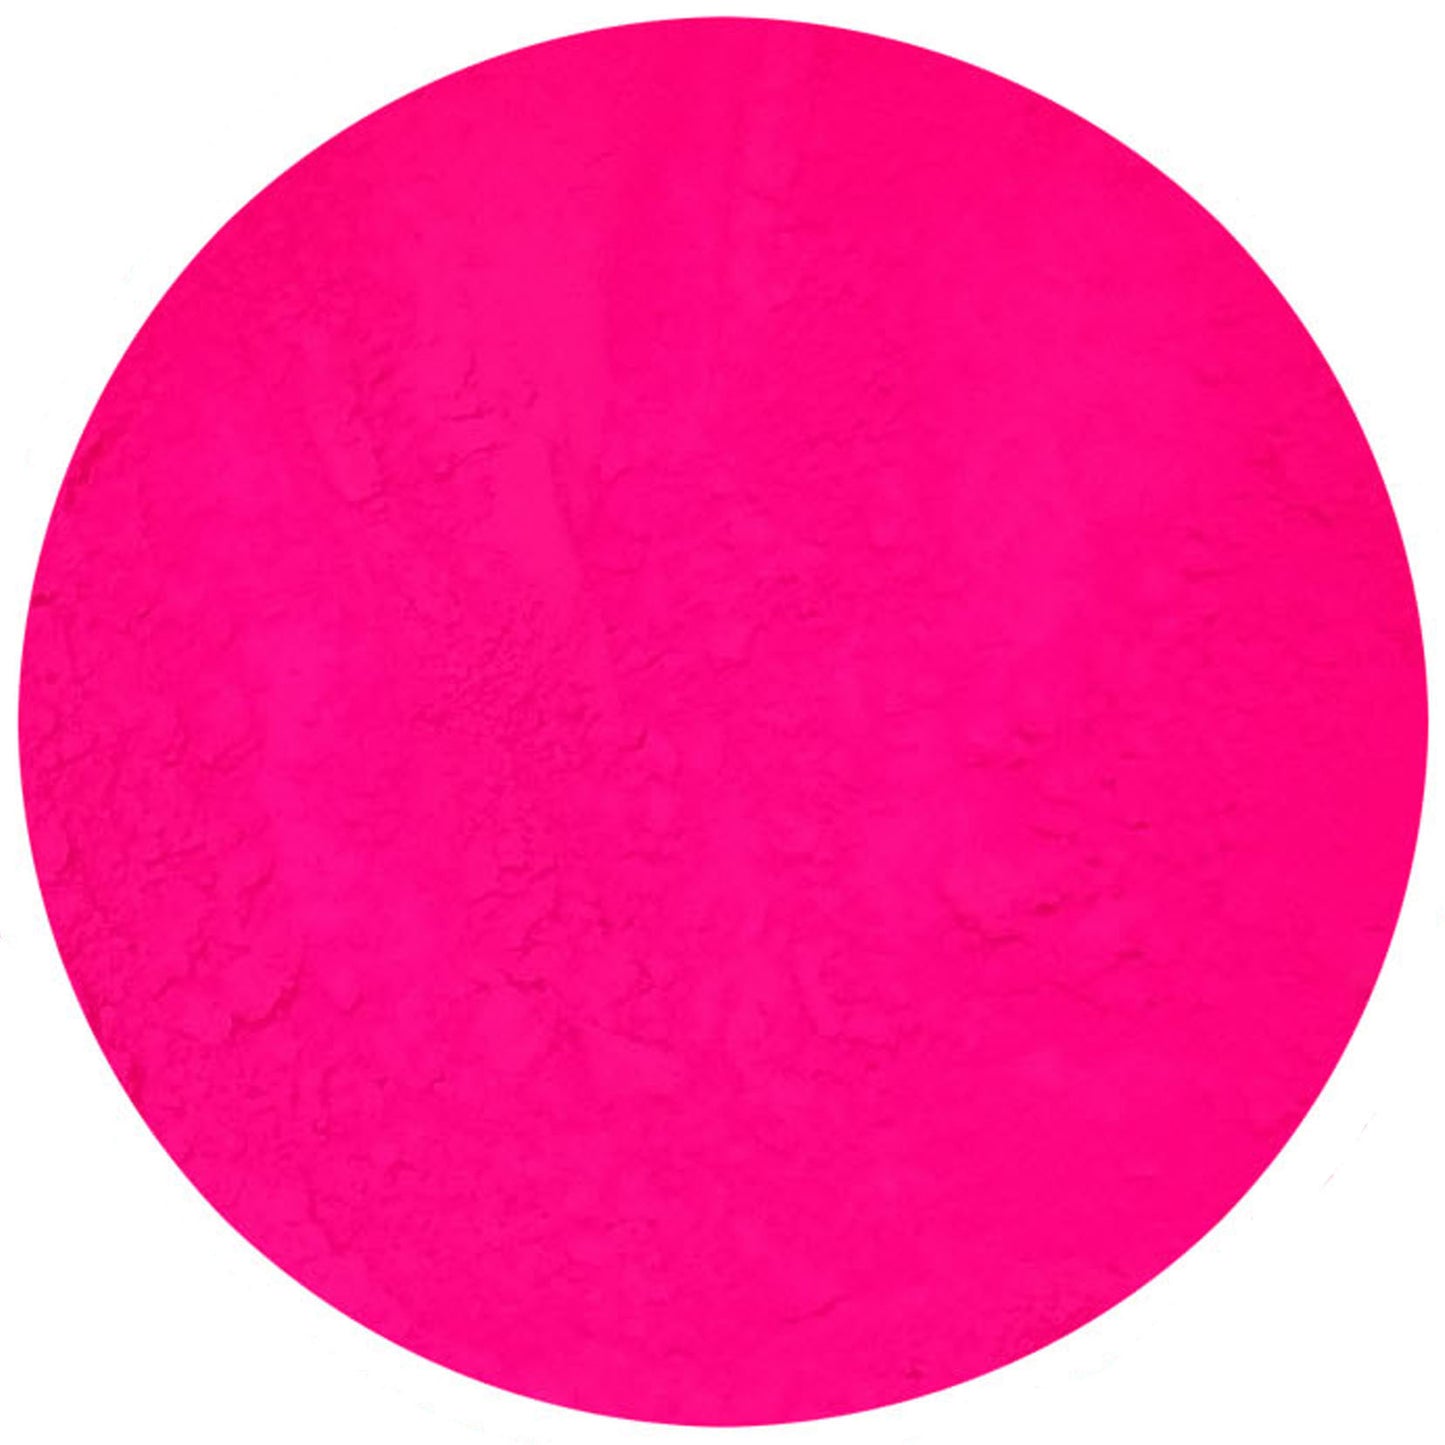 Neon Pink | Fluorescent Pigment Dye | Candles, Wax Melt, Cosmetics, Bath Bombs, Shower Gel | Truly Personal